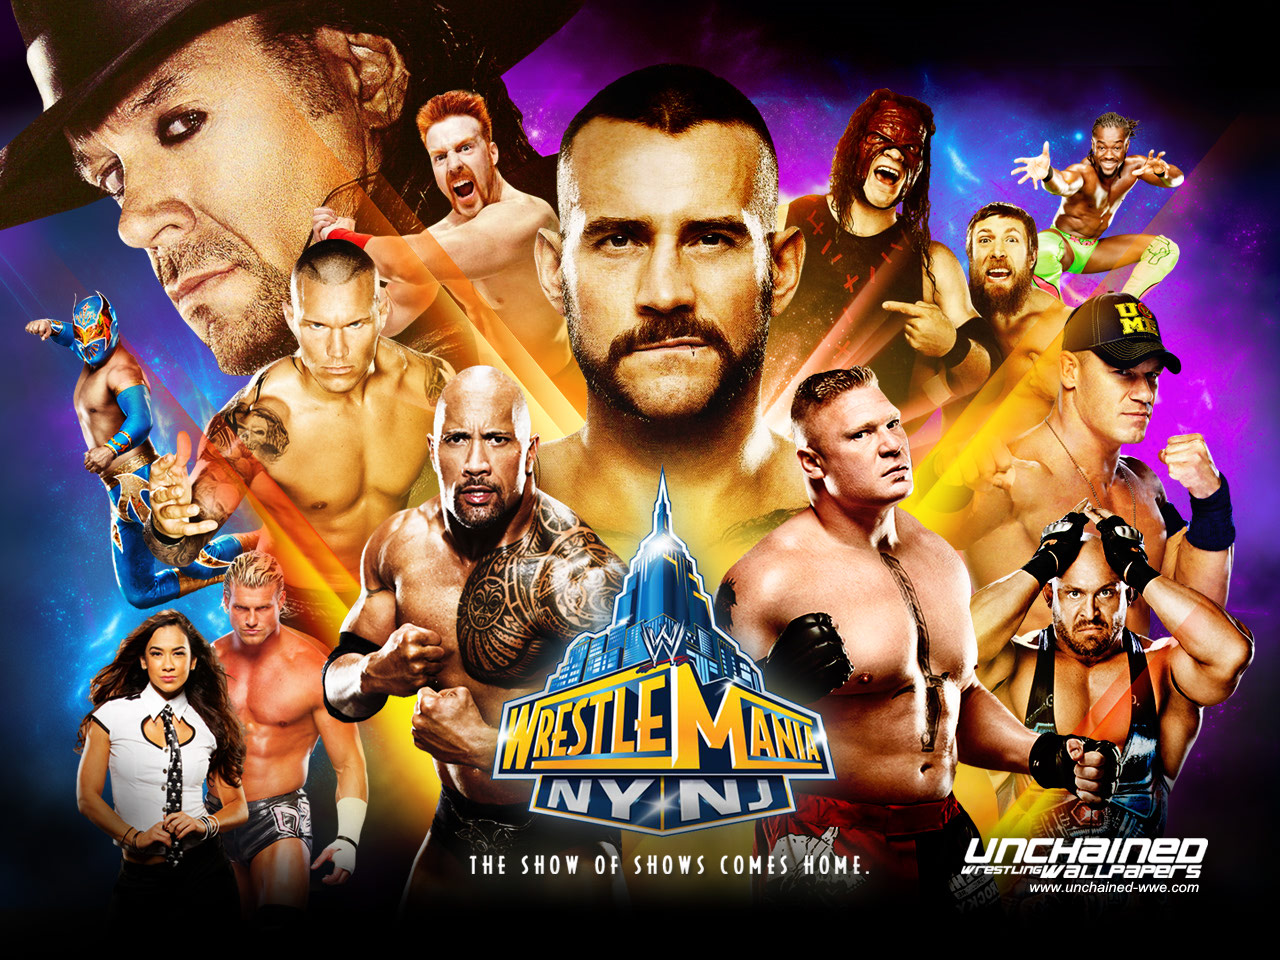 Cool Wwe Picture Full HD Wall